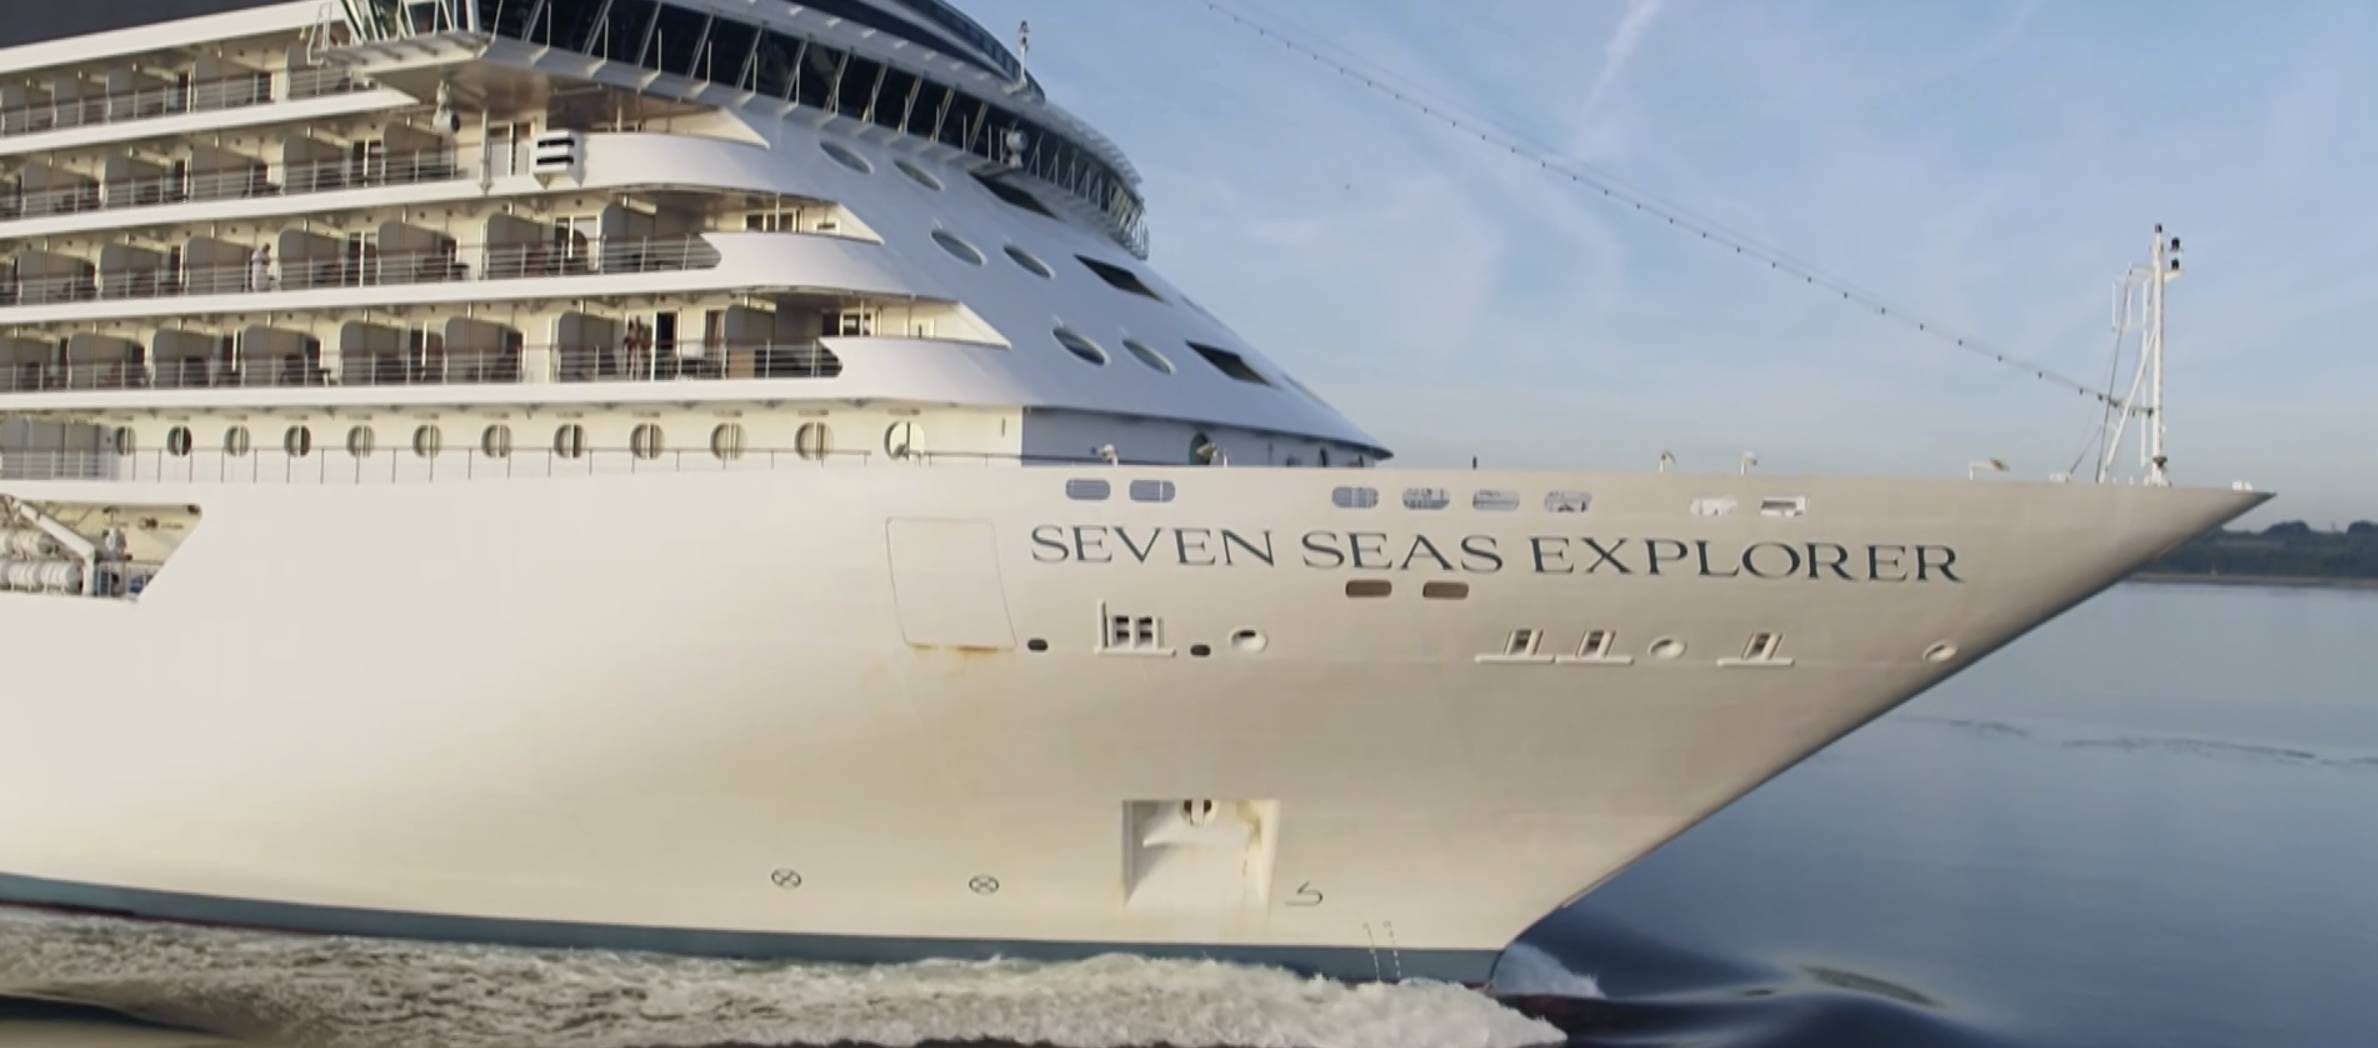 Step Aboard The Seven Seas Explorer On 'World's Most Expensive Cruise'